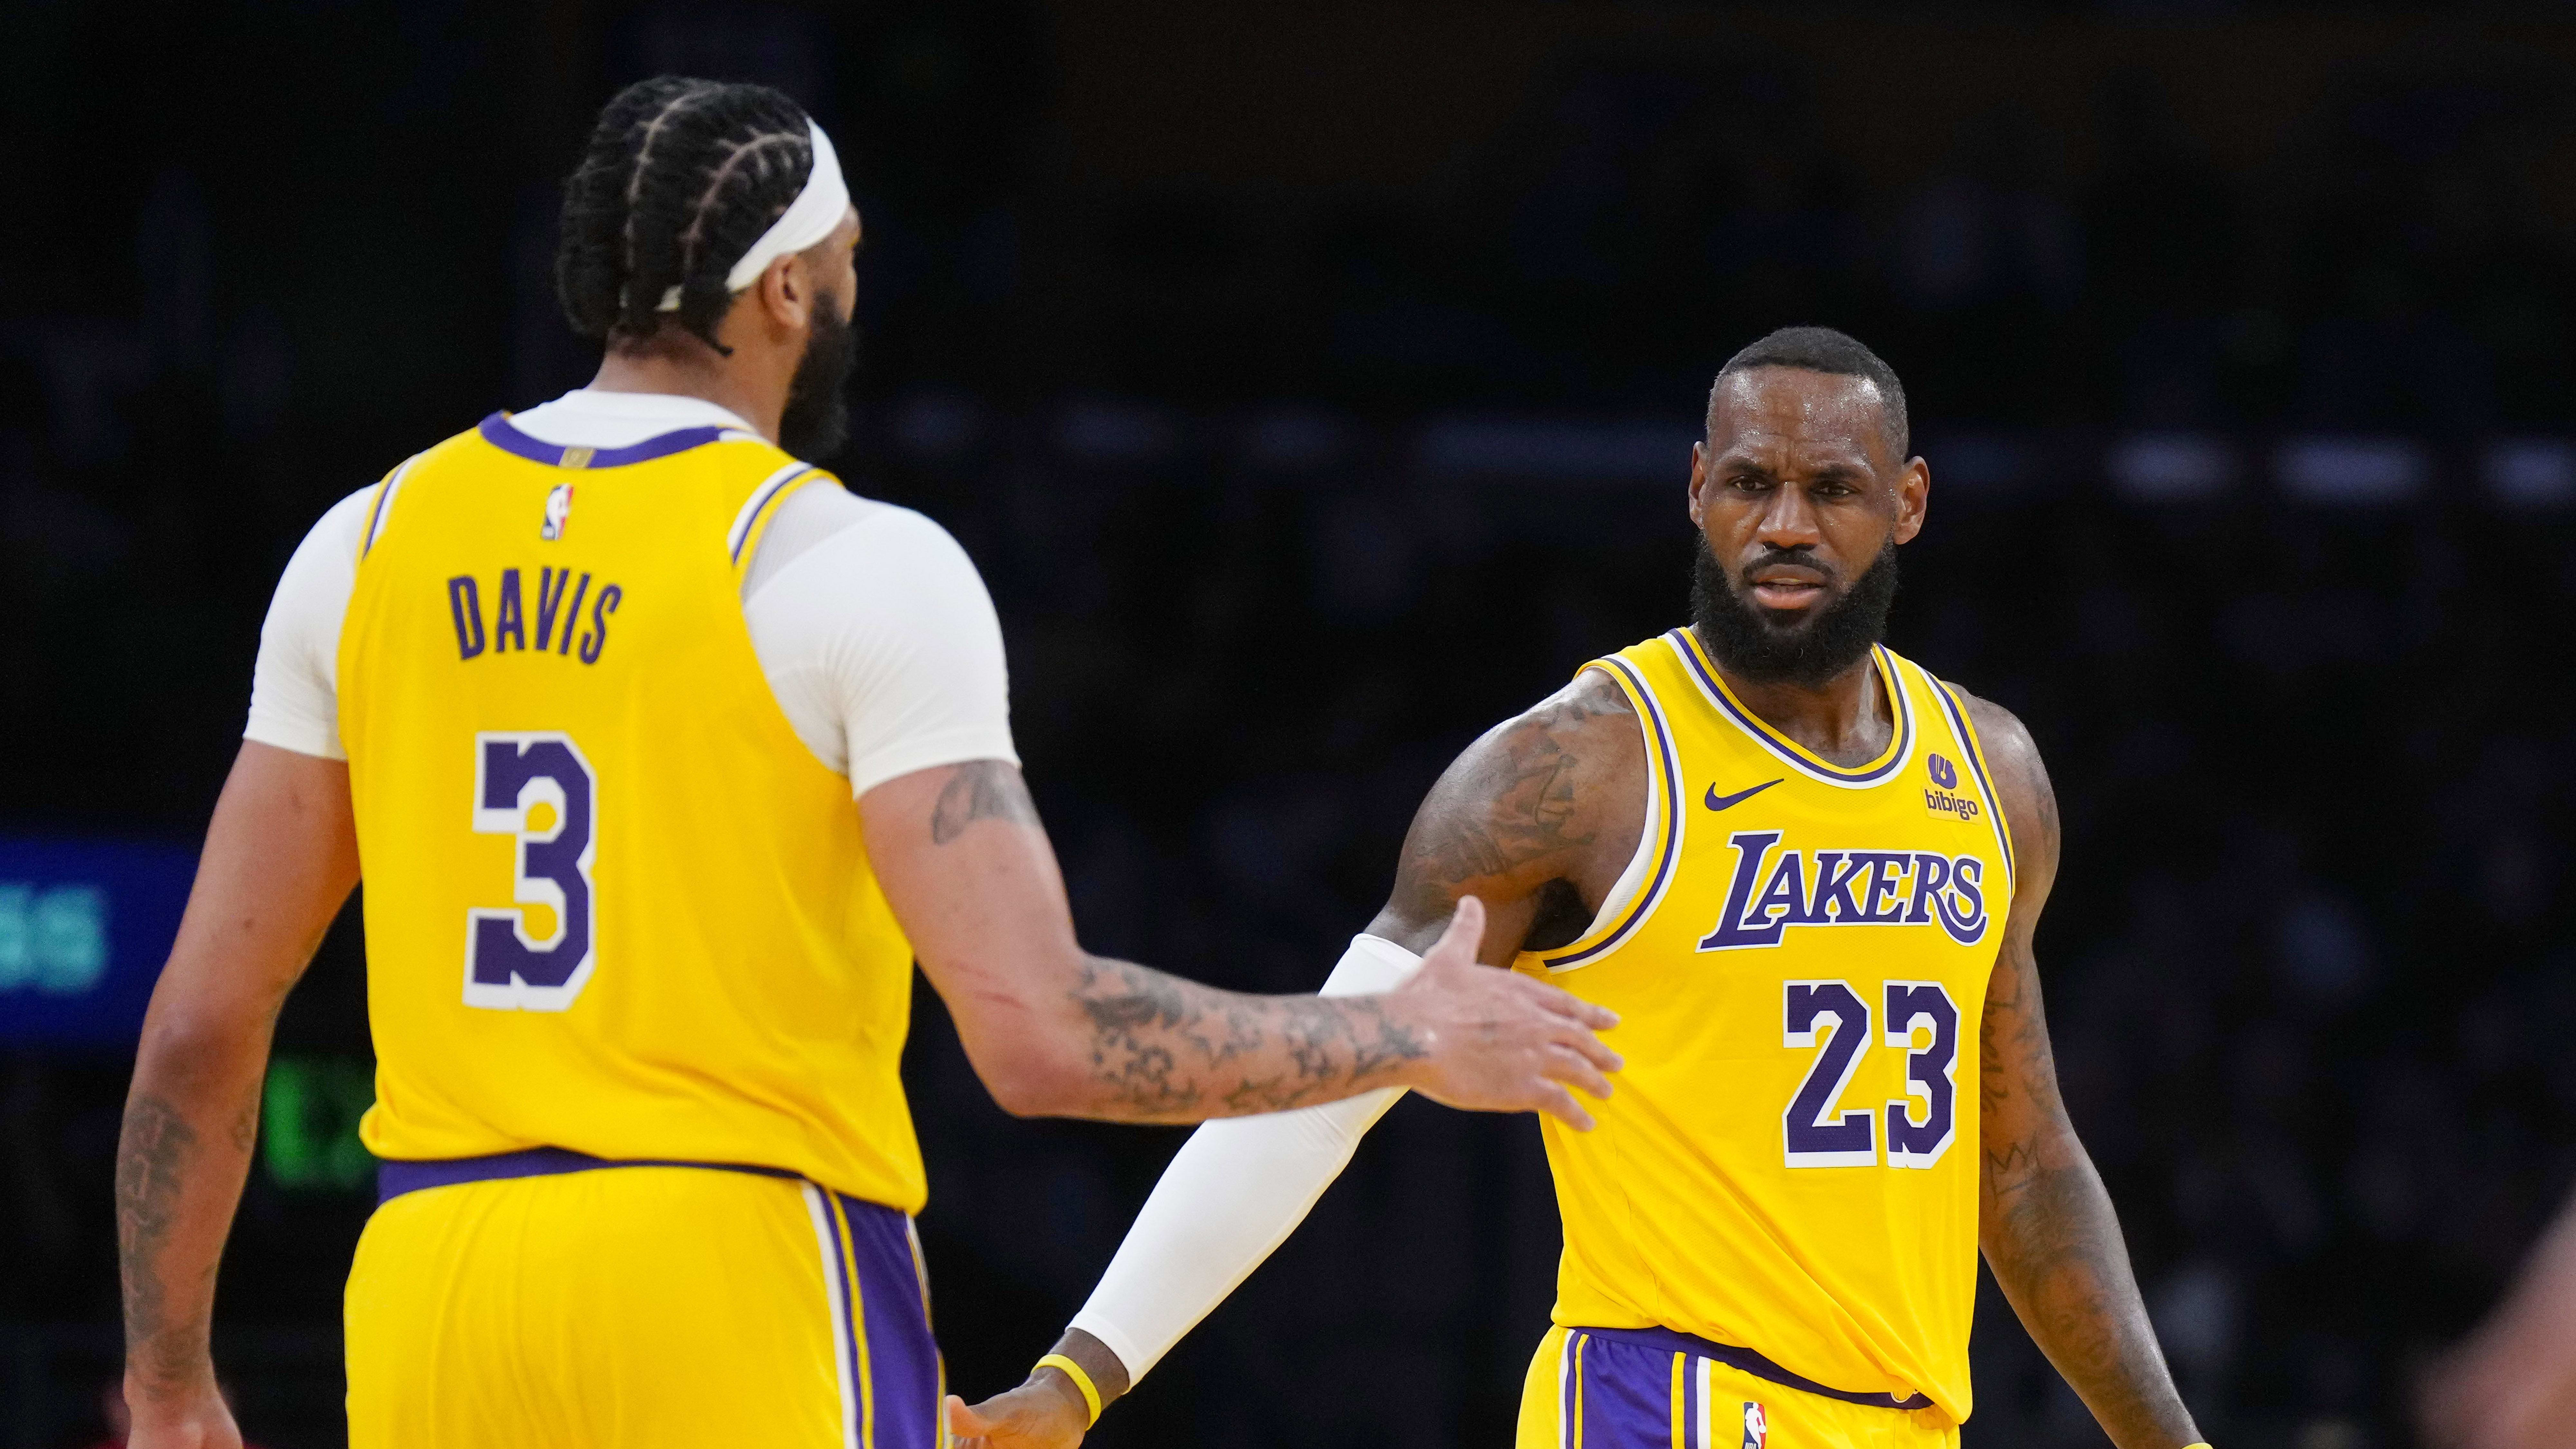 BREAKING: LeBron James And Anthony Davis’ Final Injury Status For Nuggets-Lakers Game